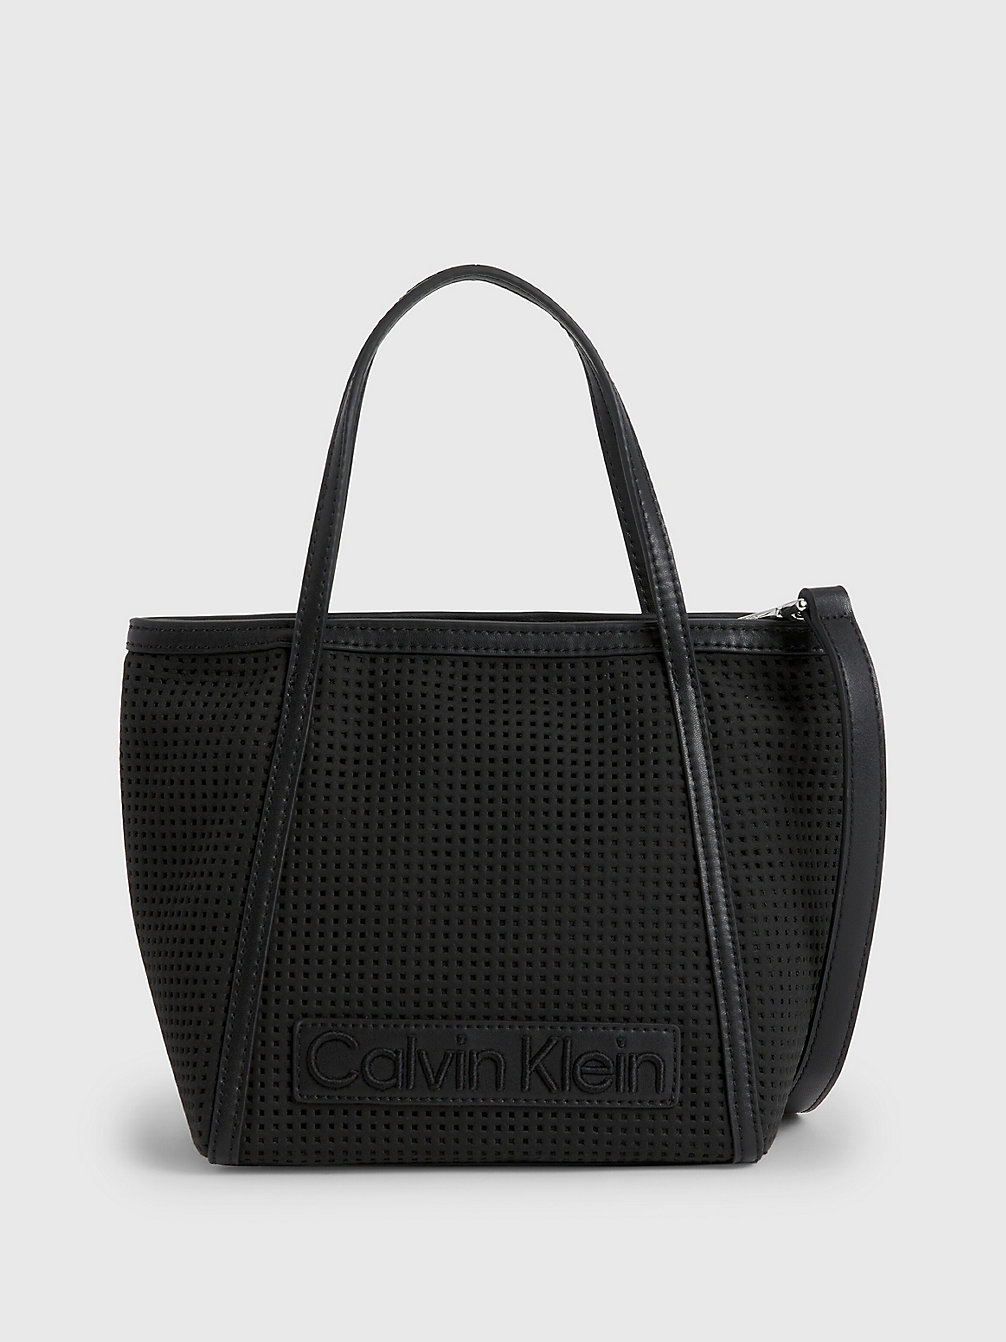 CK BLACK Small Perforated Tote Bag undefined women Calvin Klein